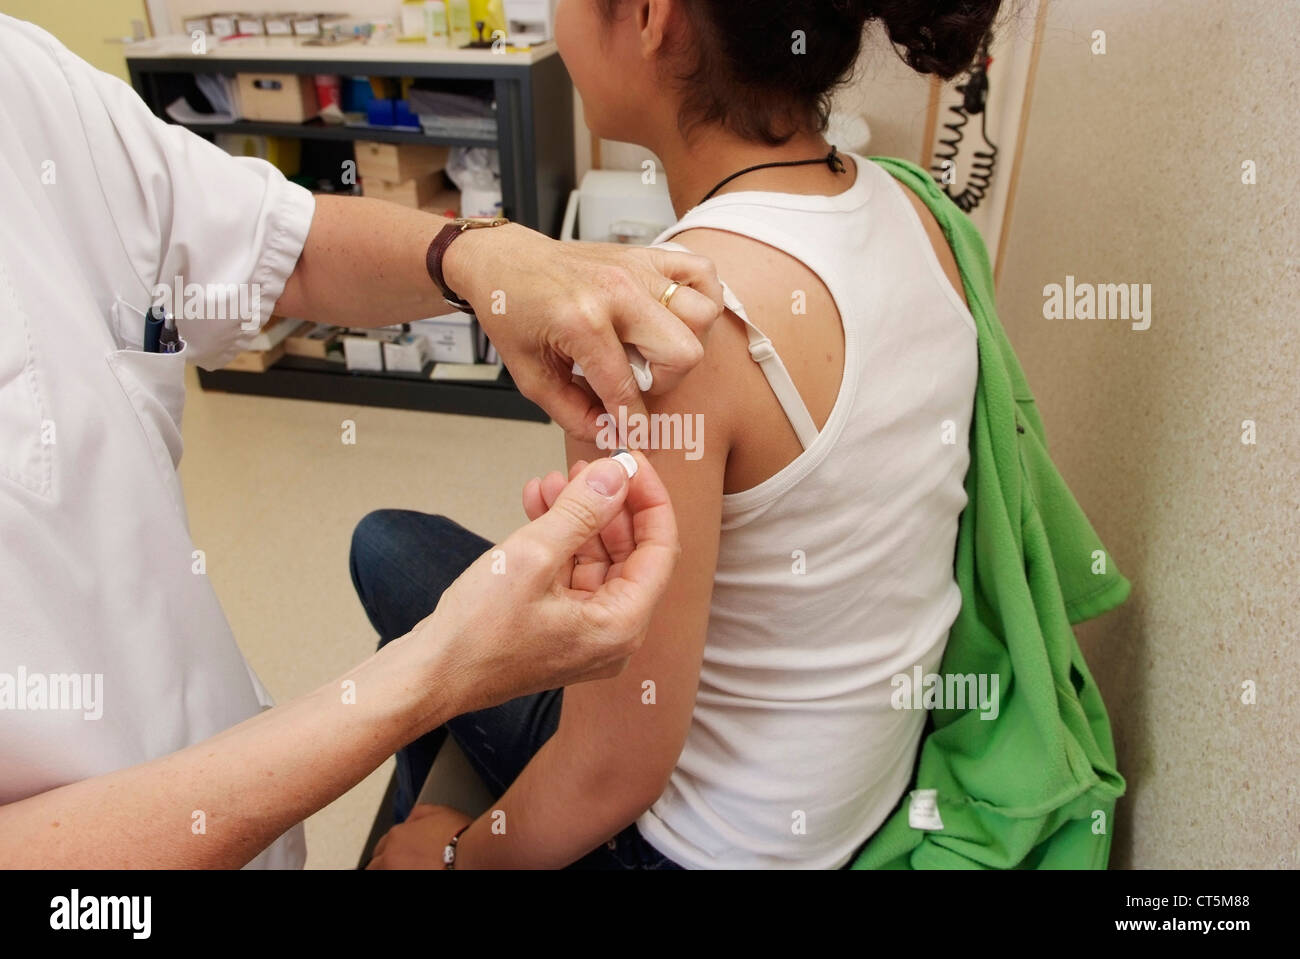 VACCINATING AN ADOLESCENT Stock Photo